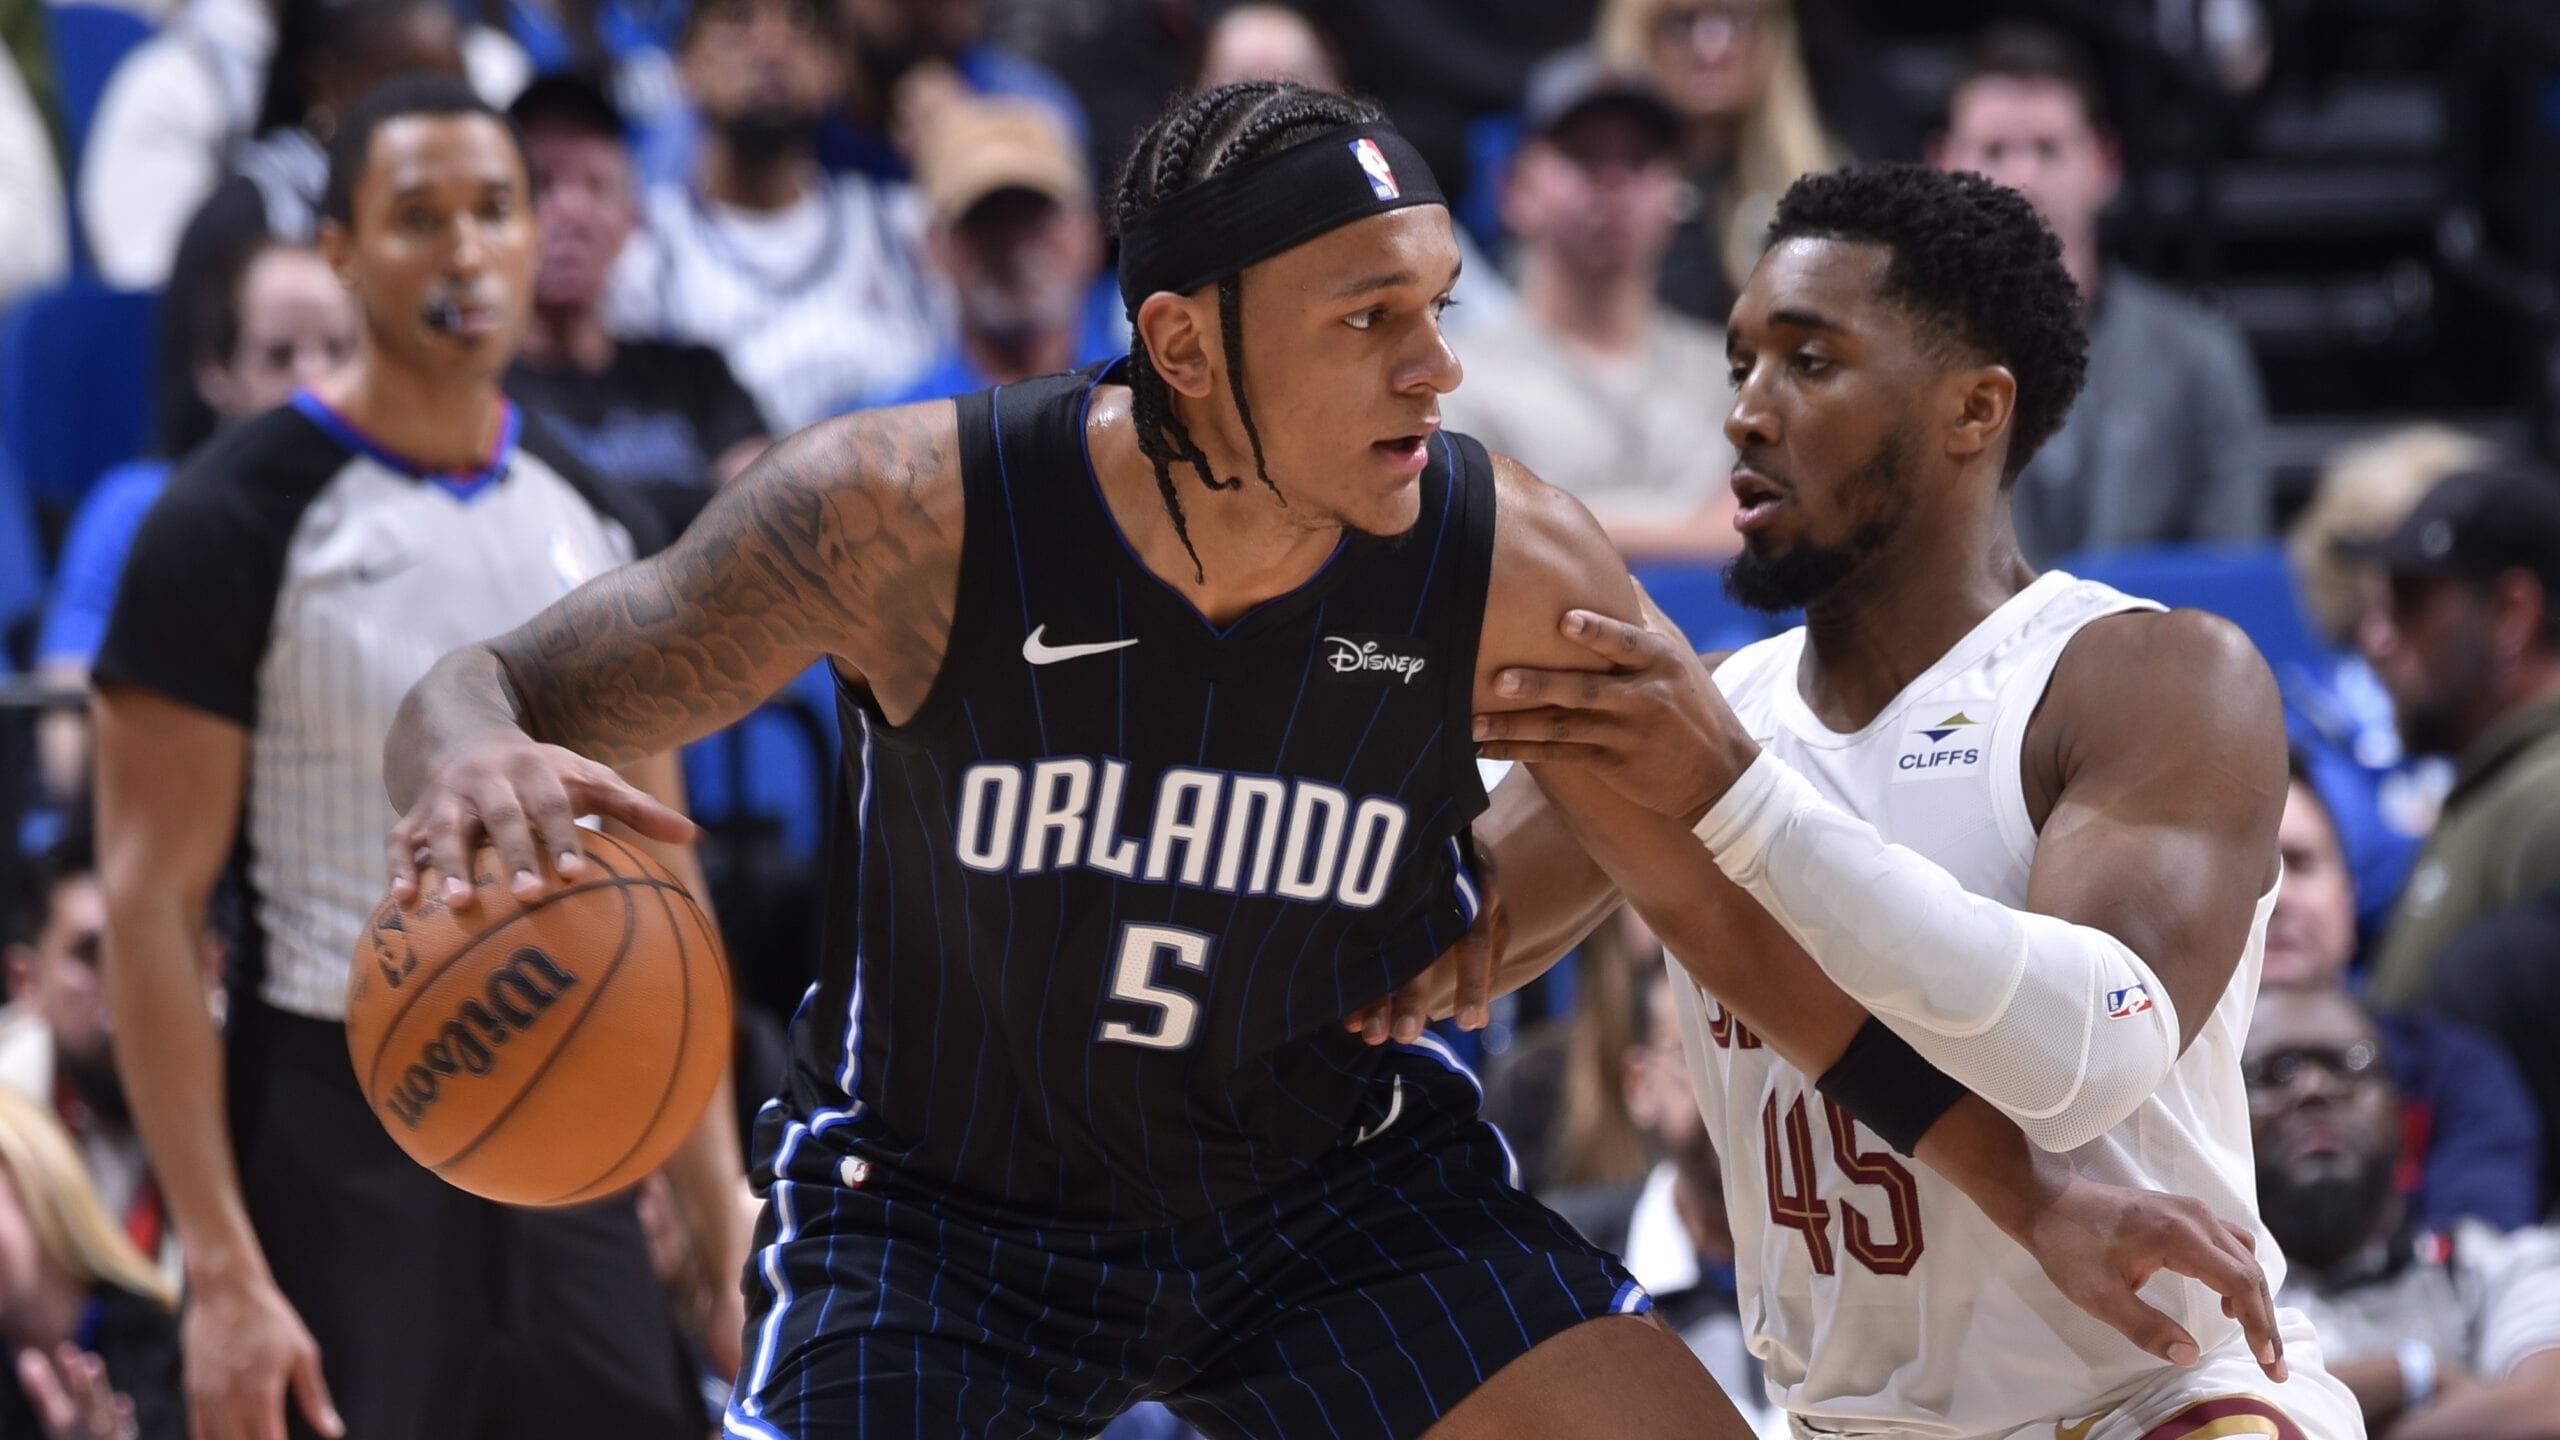 Cavaliers-Magic: Schedule, how to watch, predictions & analysis